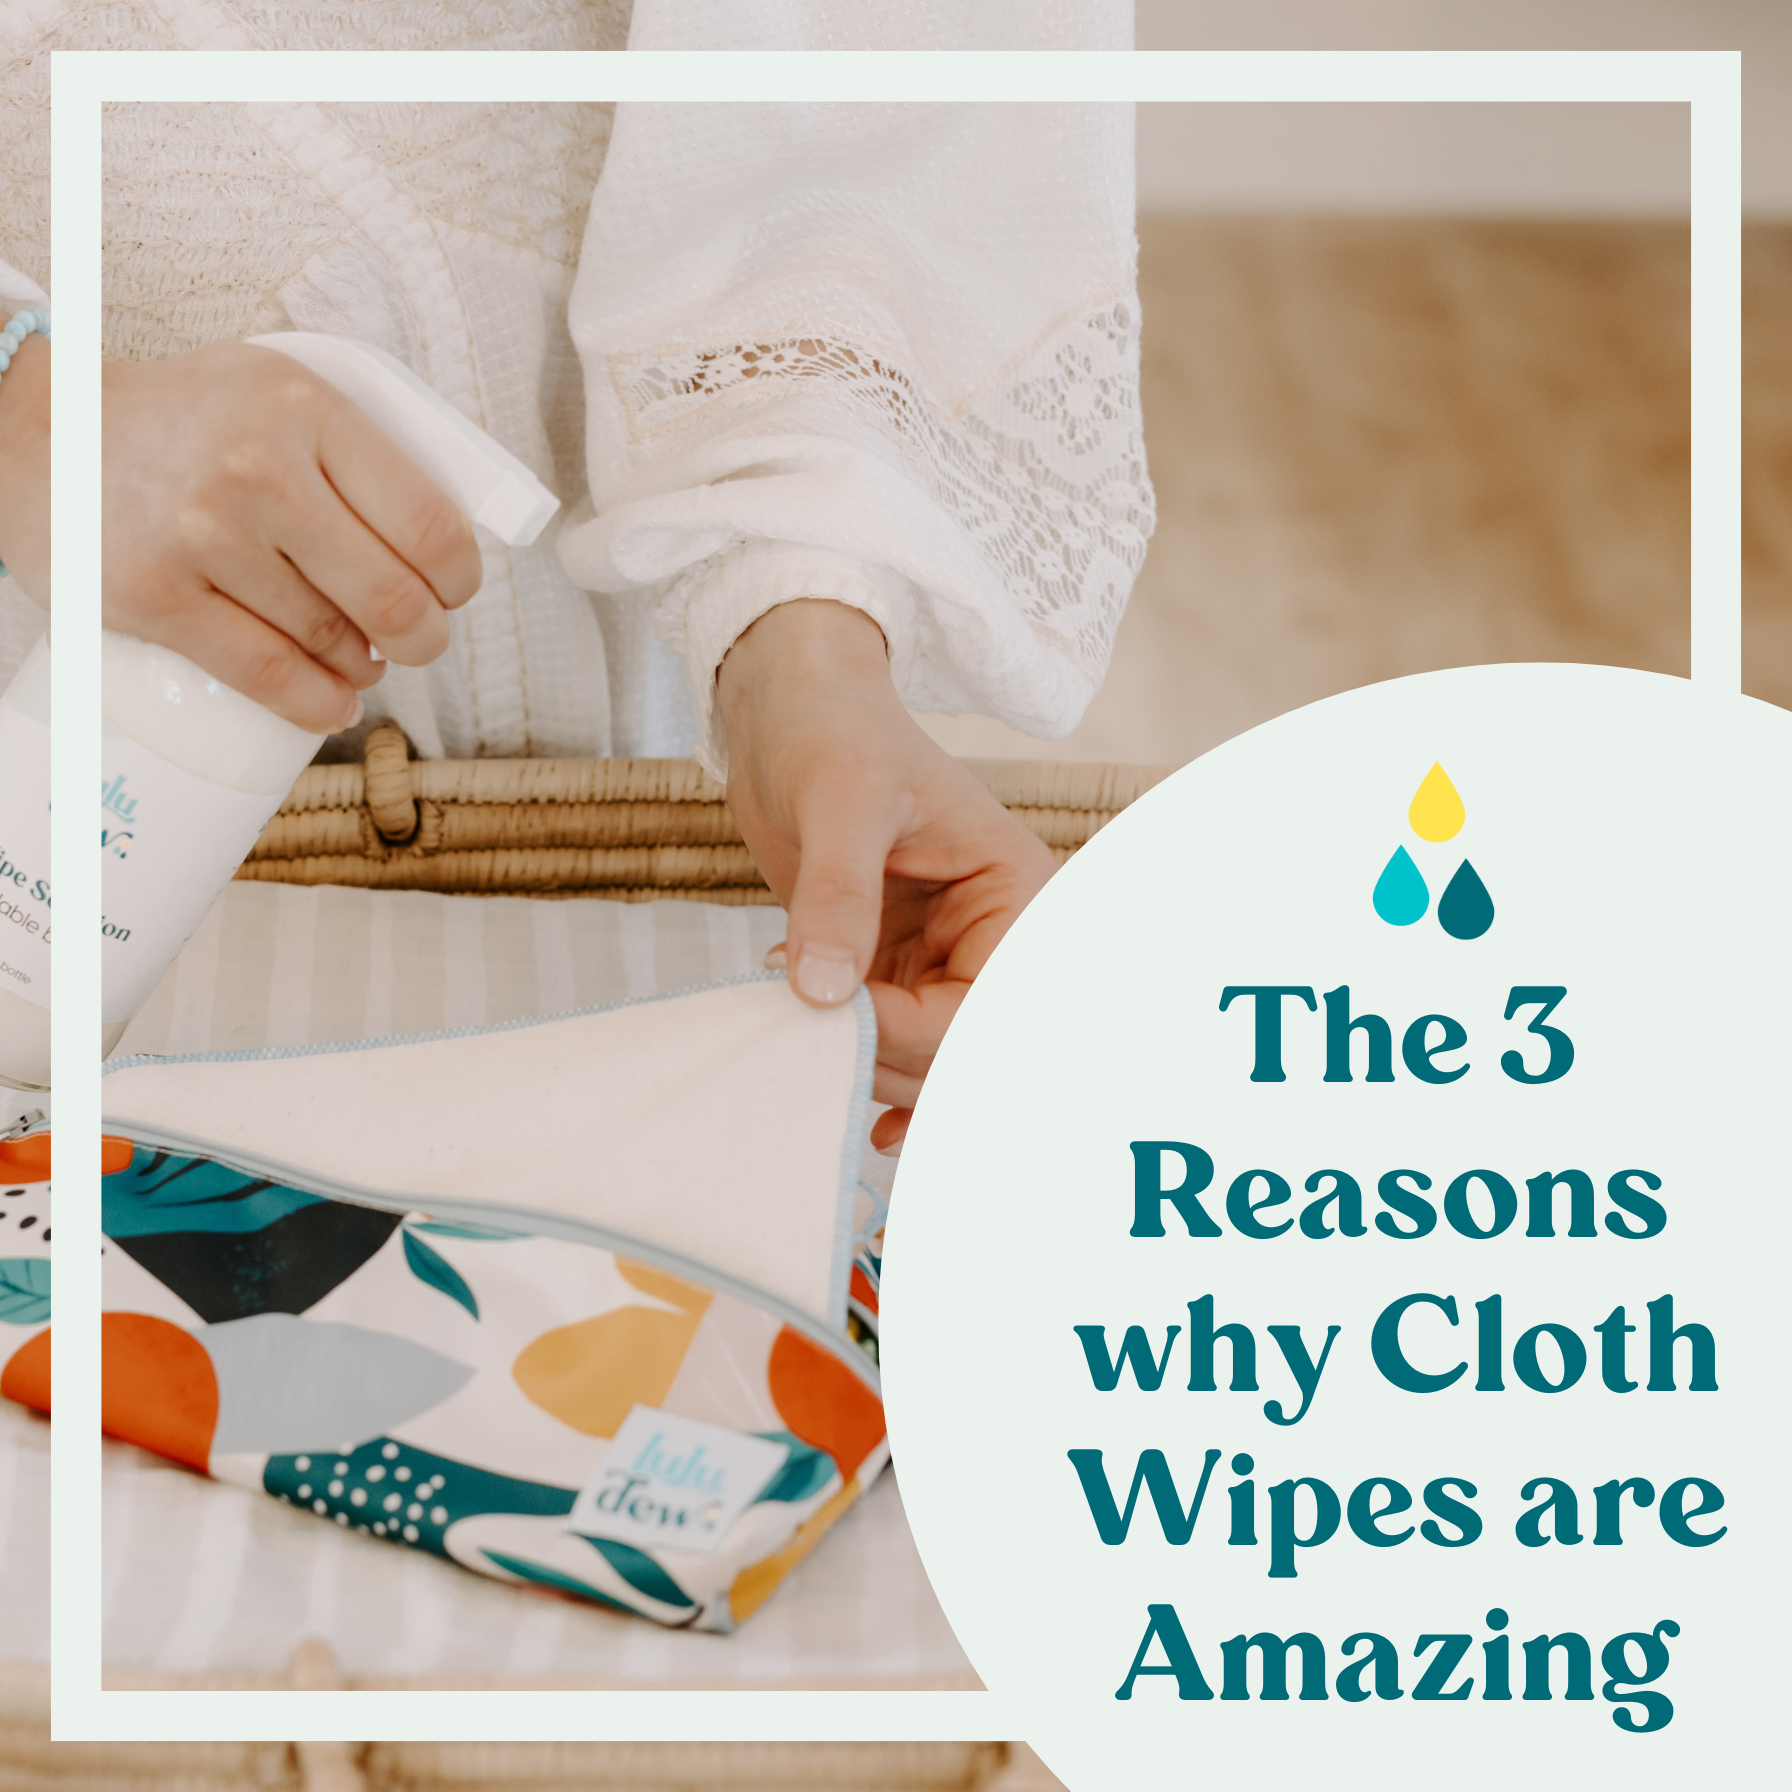 The 3 Reasons why Cloth Wipes are Amazing